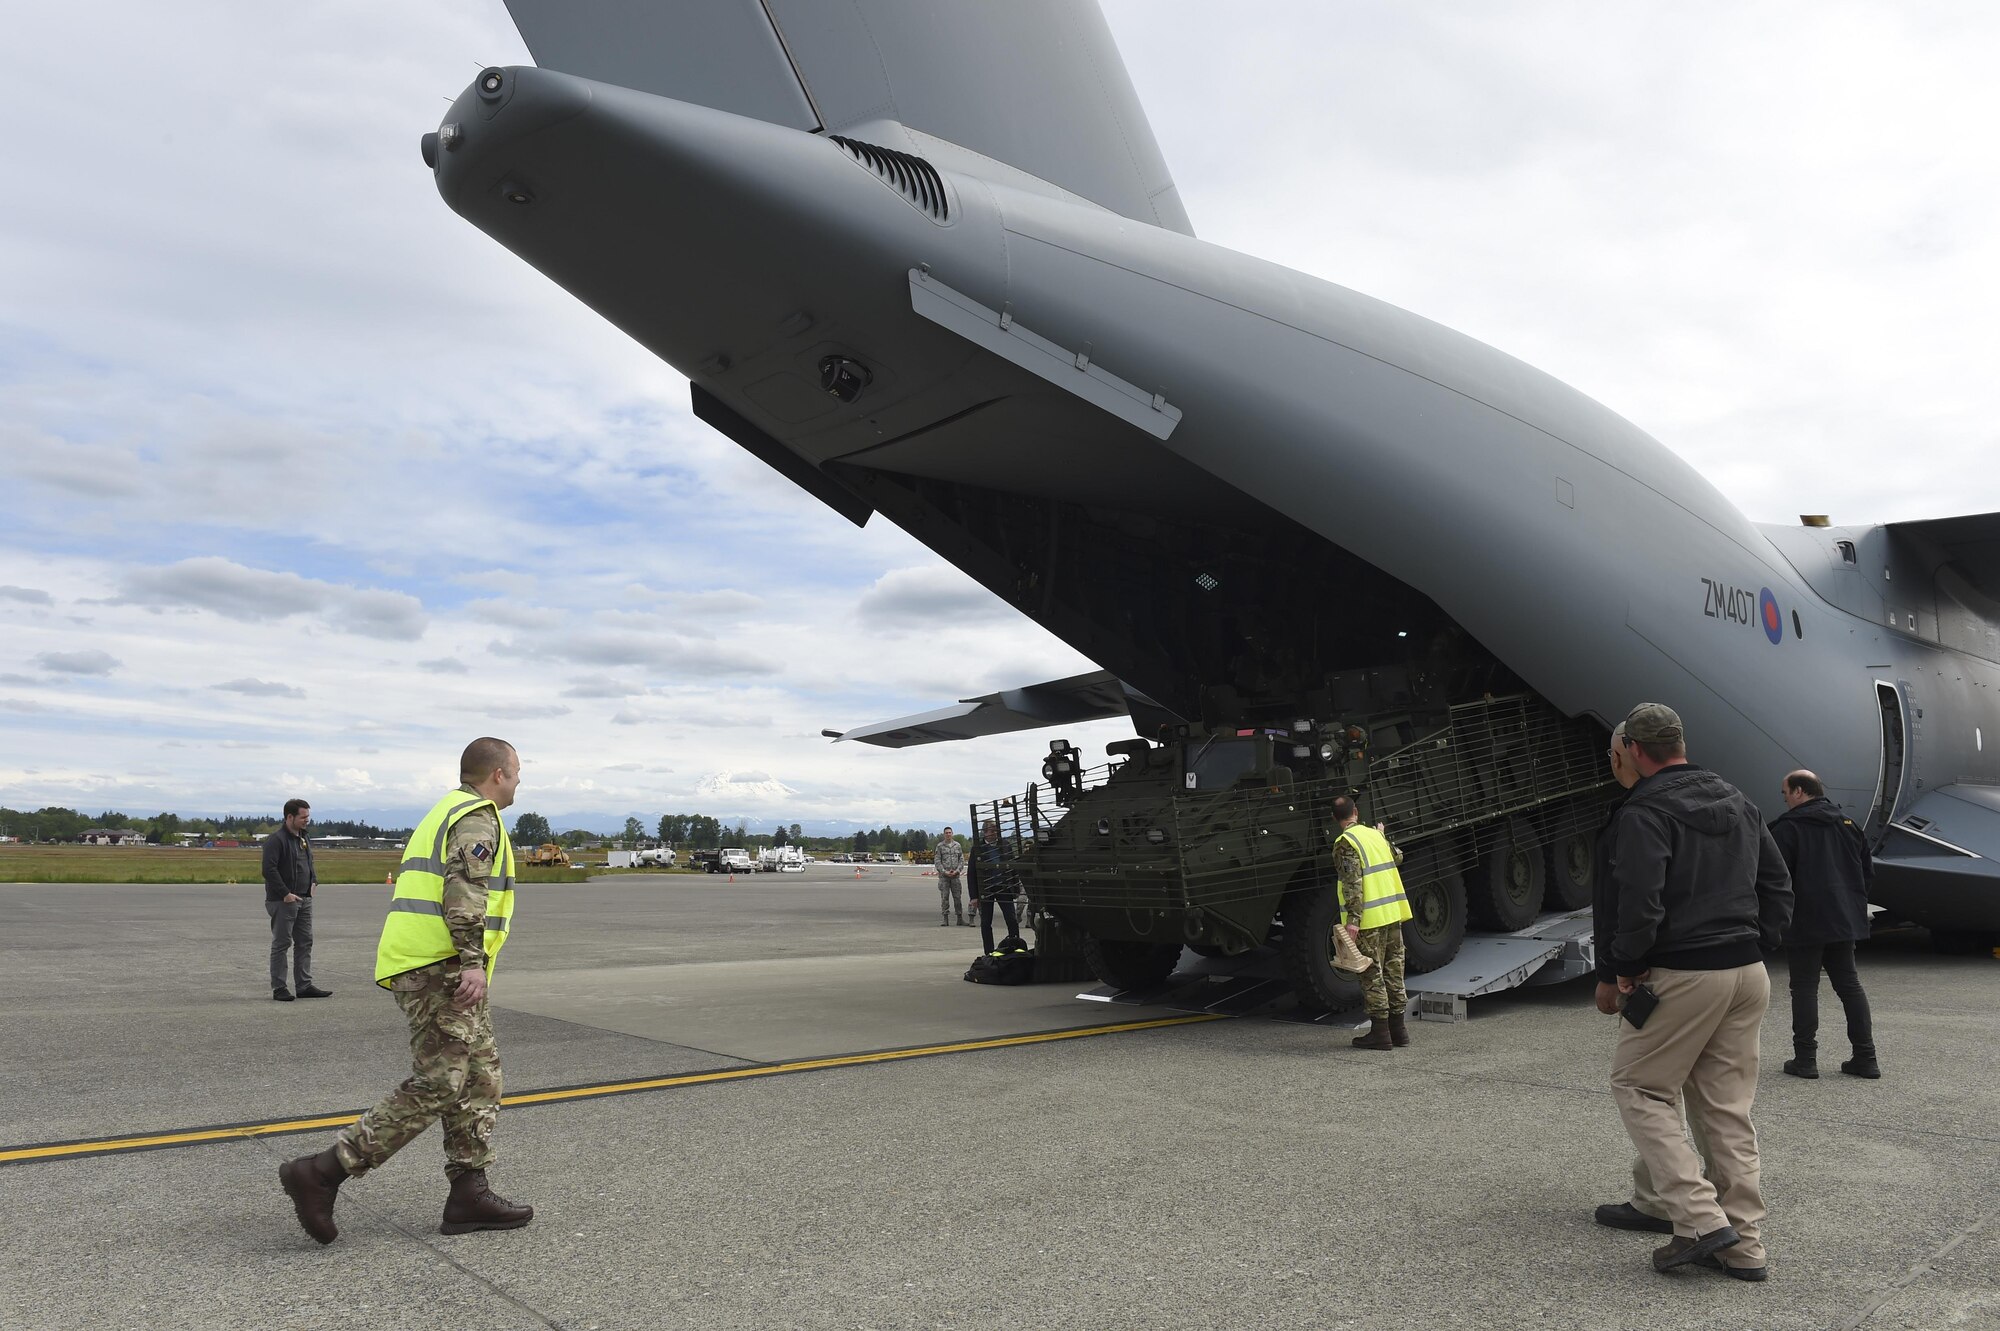 A Stryker vehicle is nearly loaded onto a Royal Air Force A-400M aircraft by the 1st Stryker Brigade Combat Team Soldiers on the McChord Field flightline on May 18, 2017, at Joint Base Lewis-McChord, Wash. The RAF will be one of dozens of international militaries participating in the Mobility Guardian exercise during which JBLM will serve as the primary hub for operations. (U.S. Air Force Photo/ Staff Sgt. Naomi Shipley)